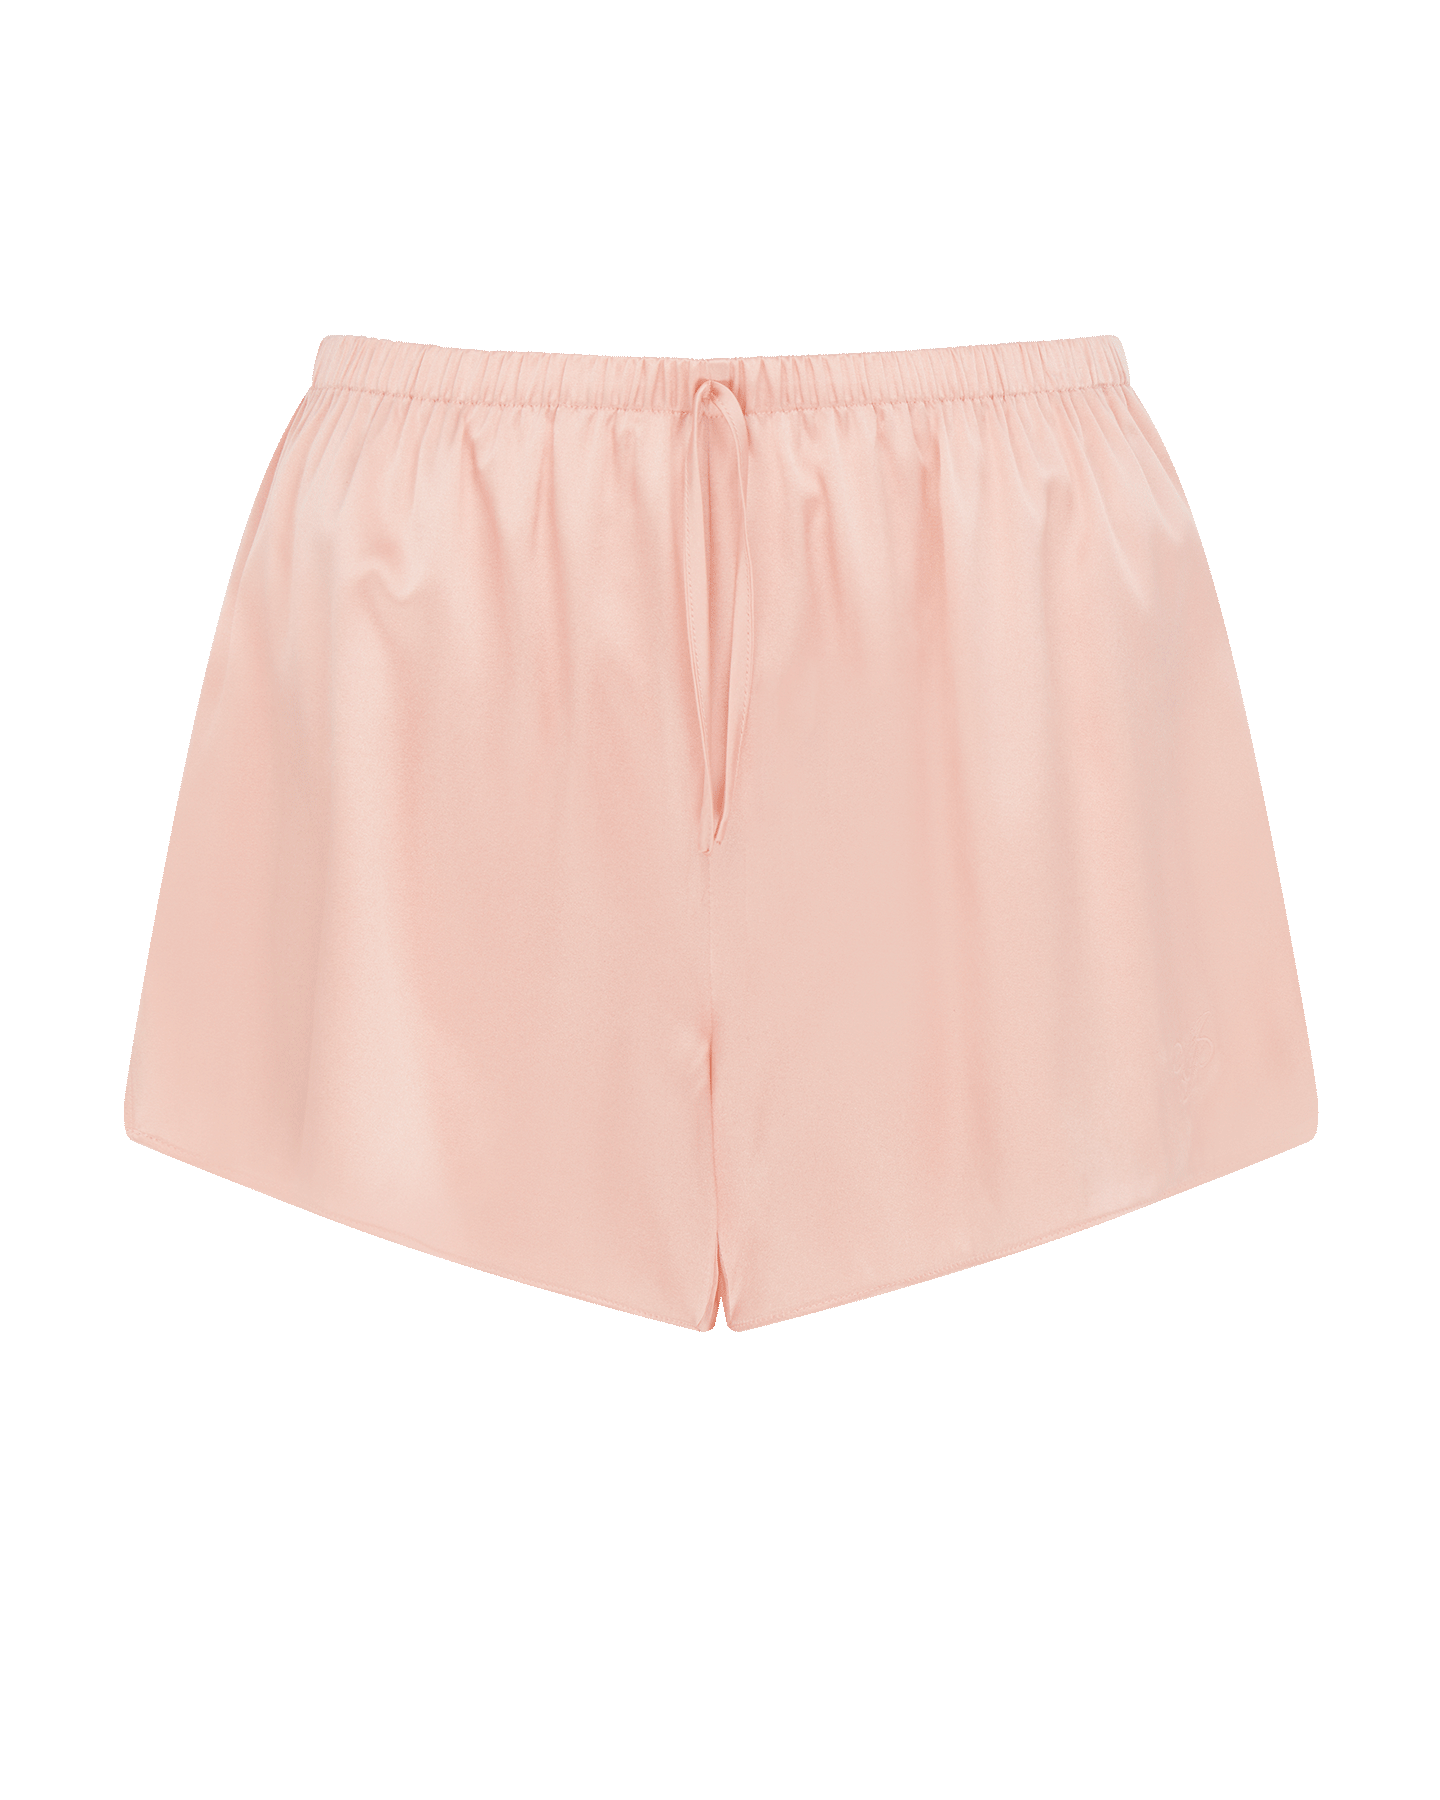 Arlette Shorts in Blush | By Agent Provocateur Outlet